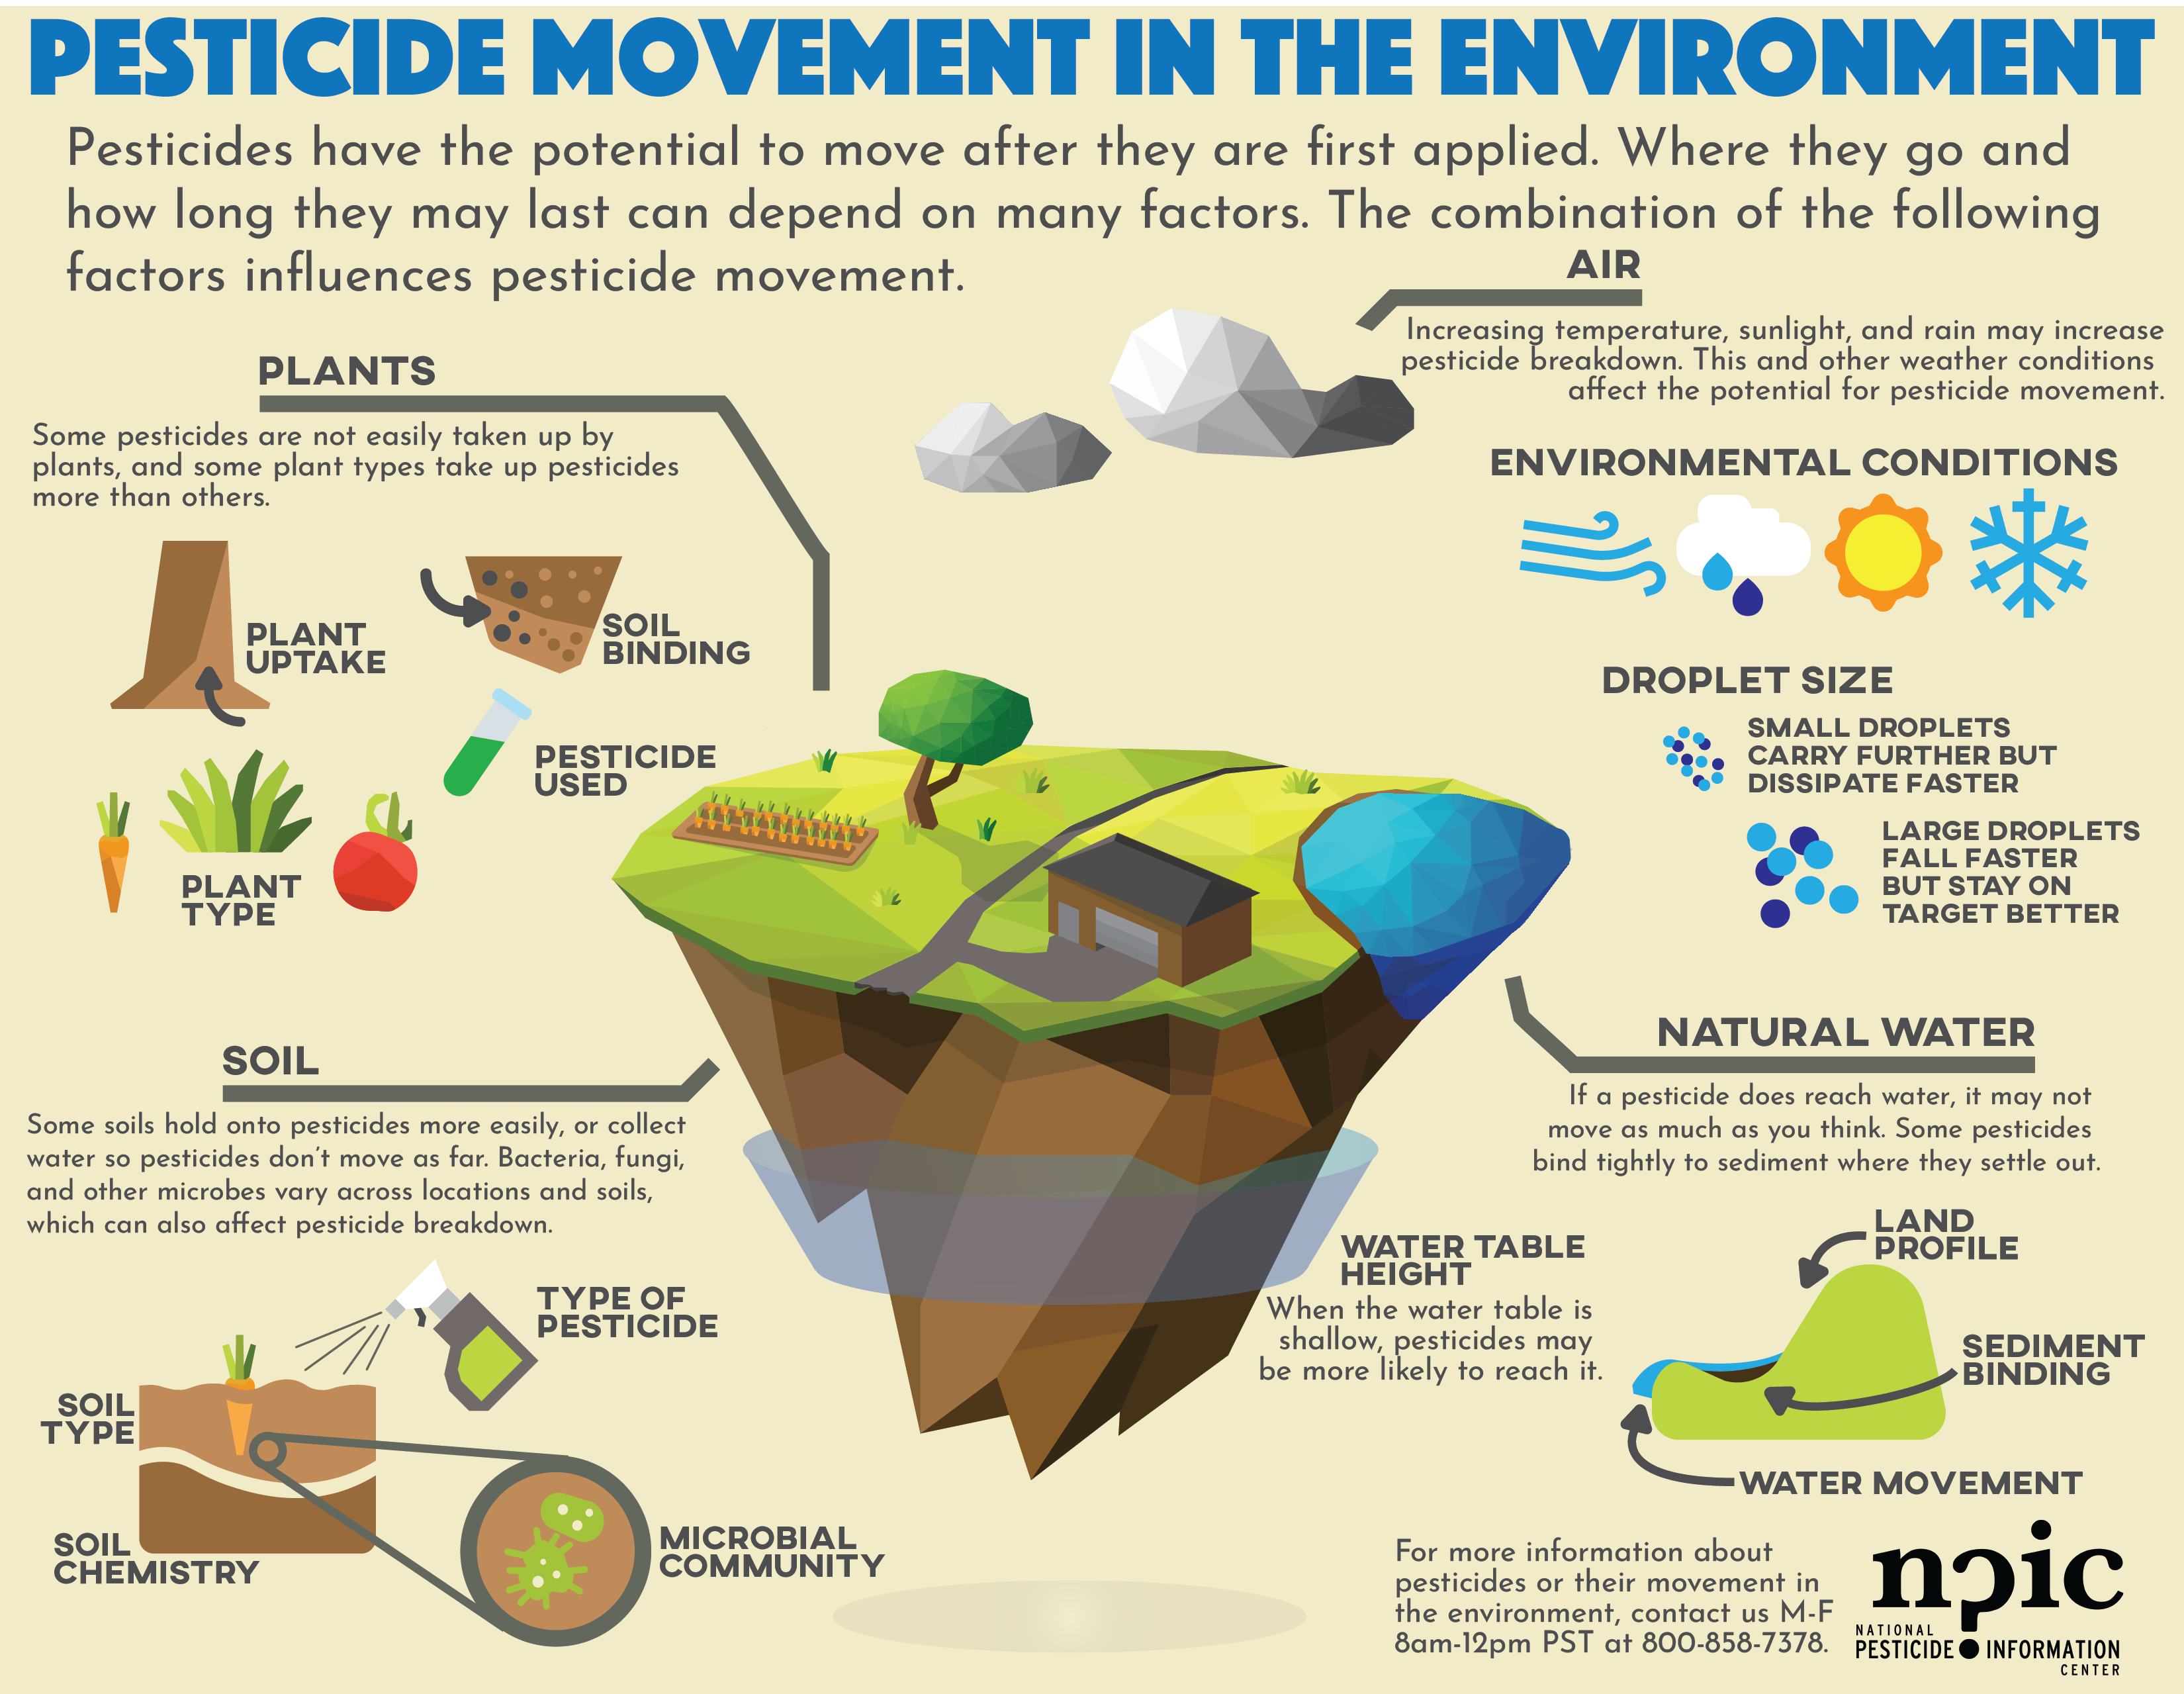 What happens to pesticides released in the environment?